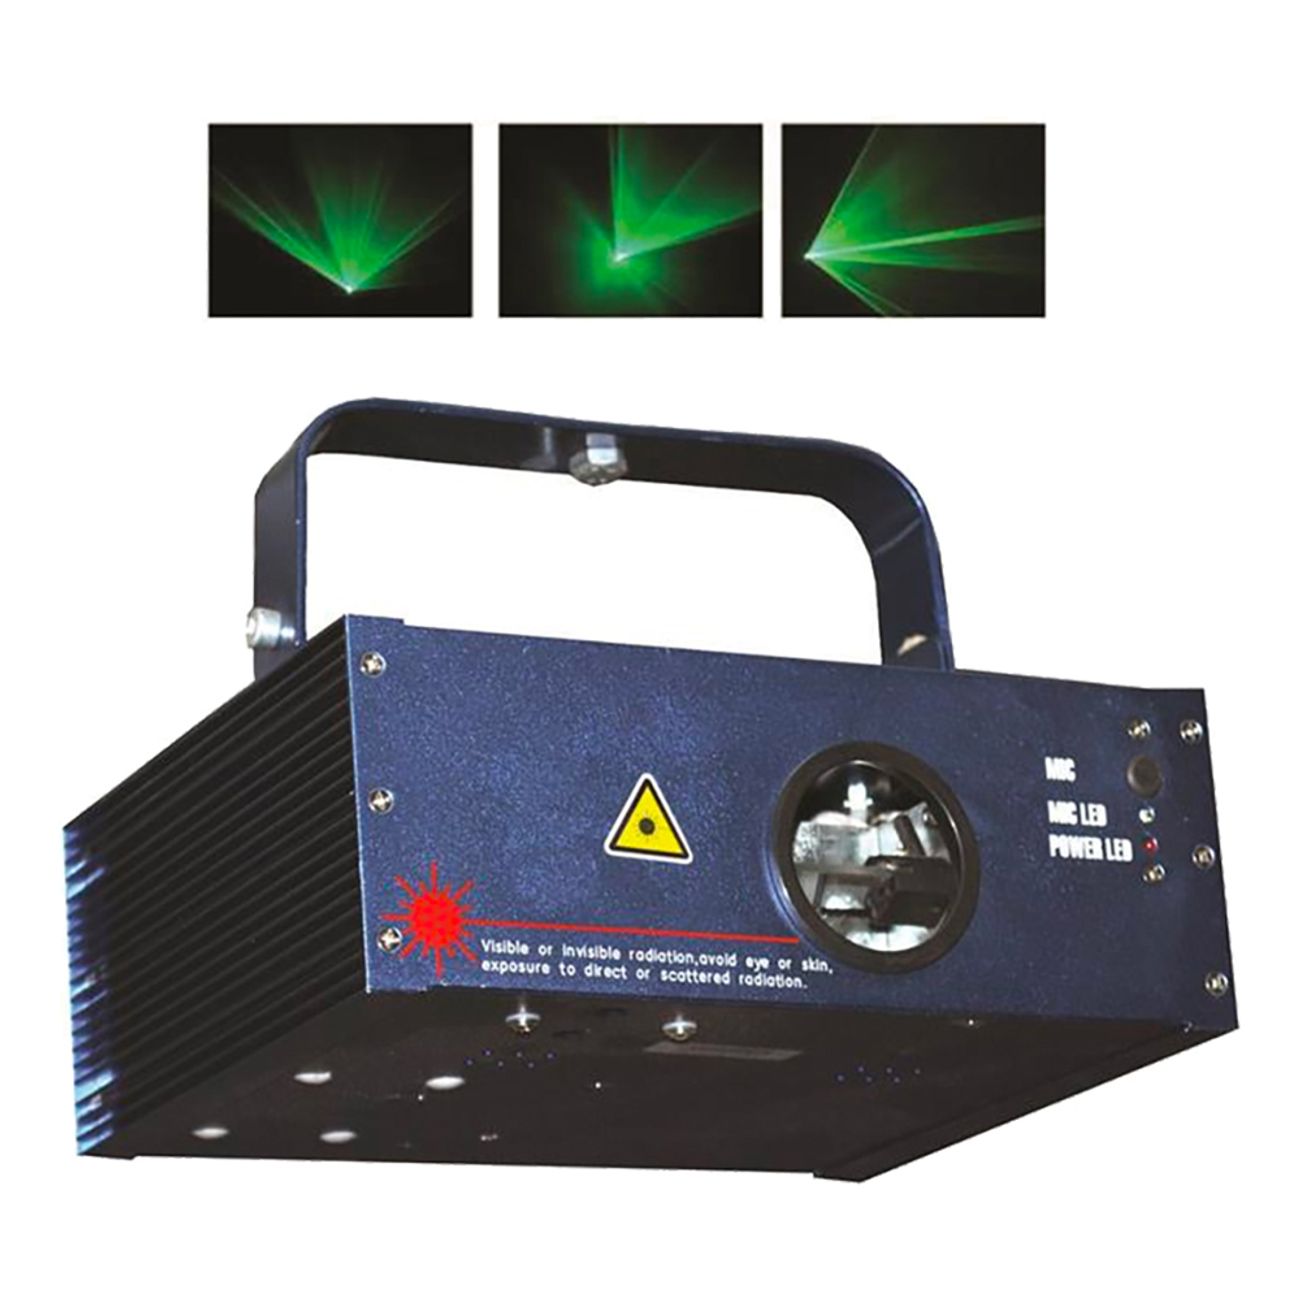 stage-effects-gron-laserlampa-85030-1